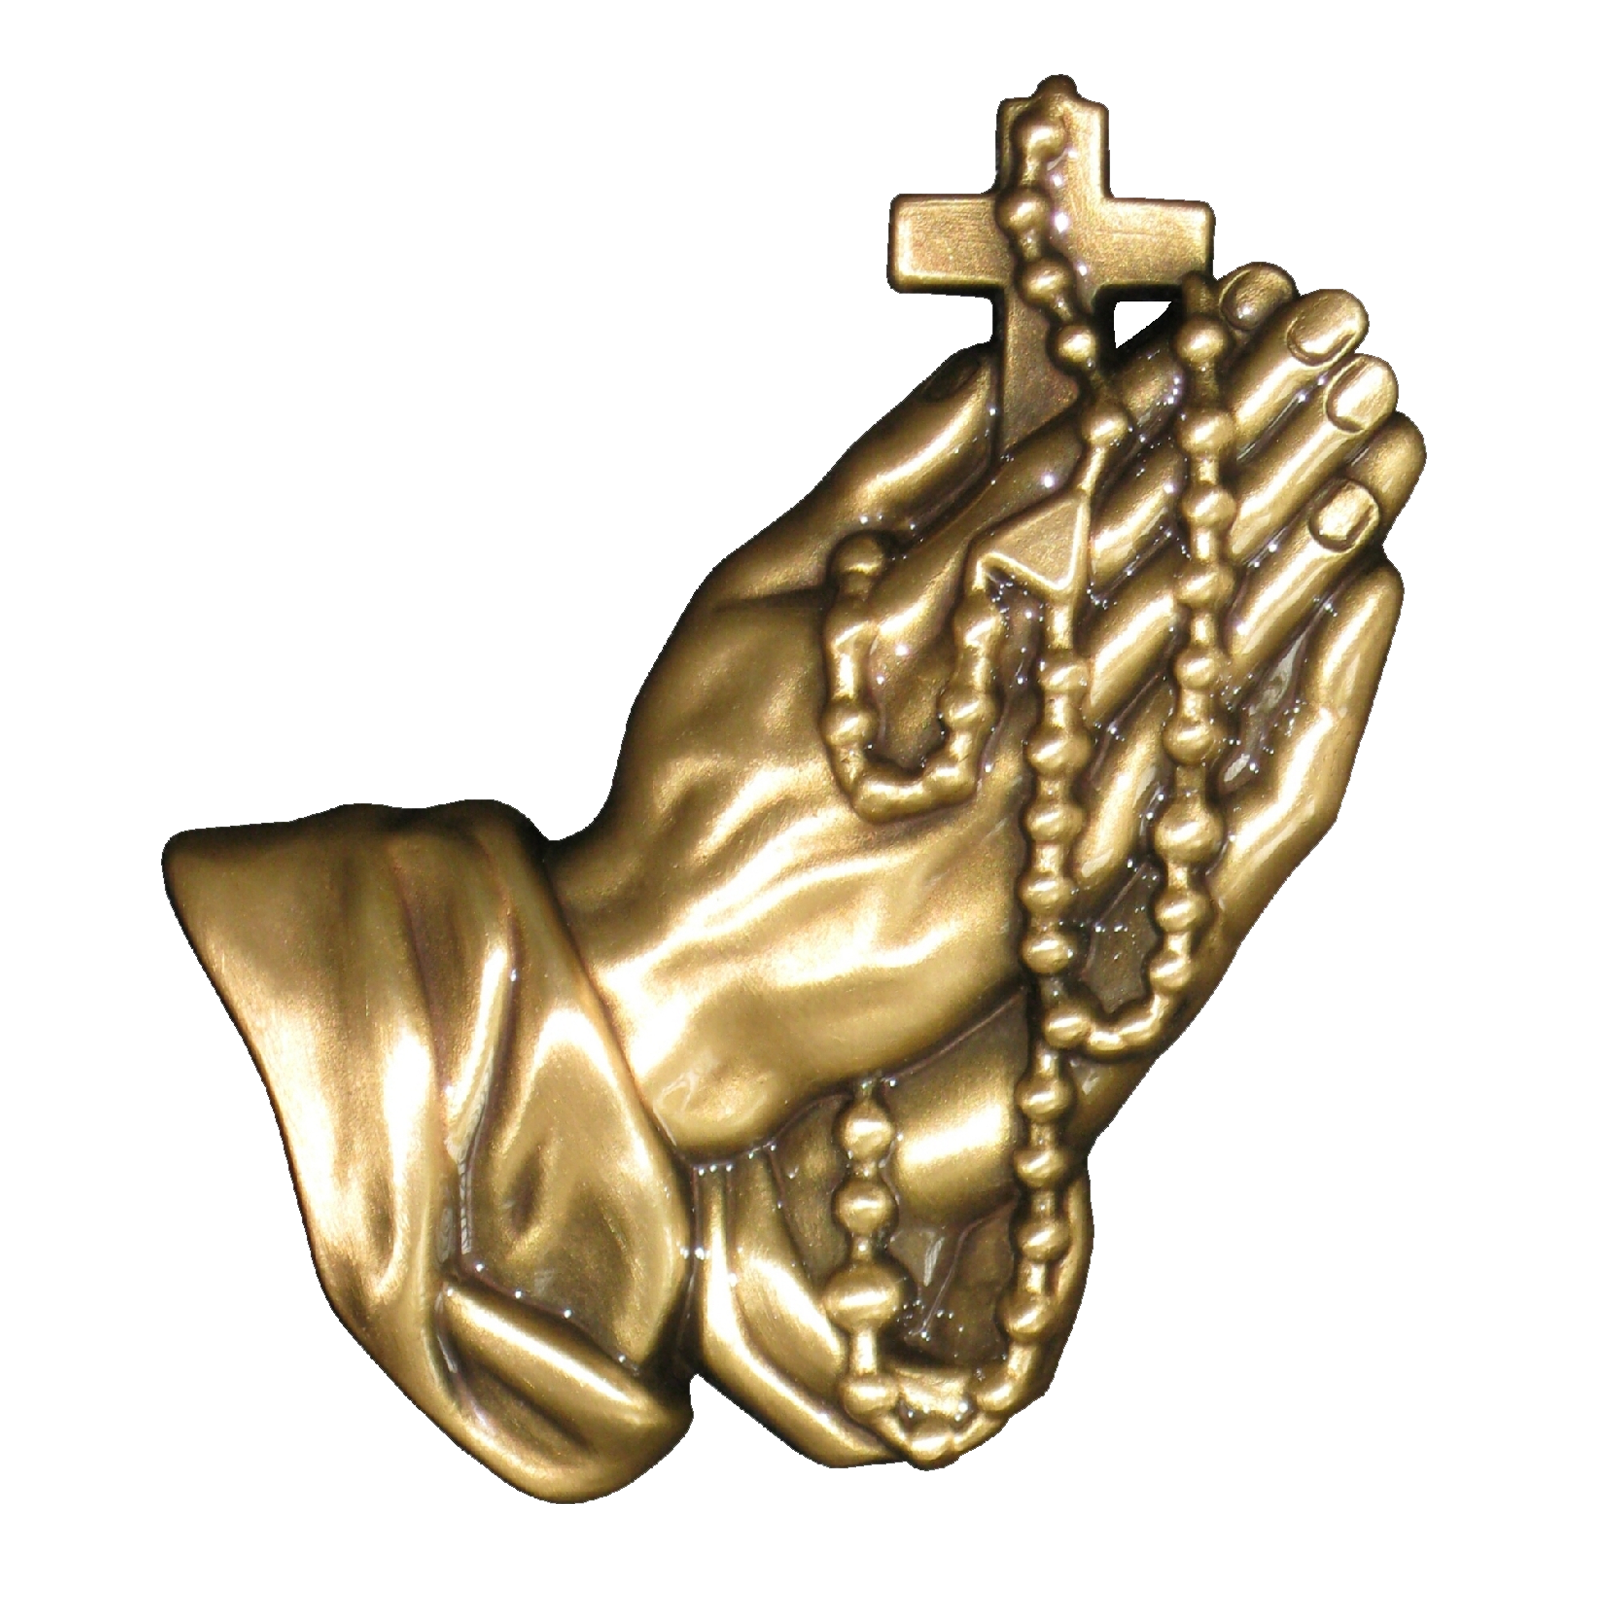 Praying Hands w/Rosary (facing right) 7.5″ x 9″